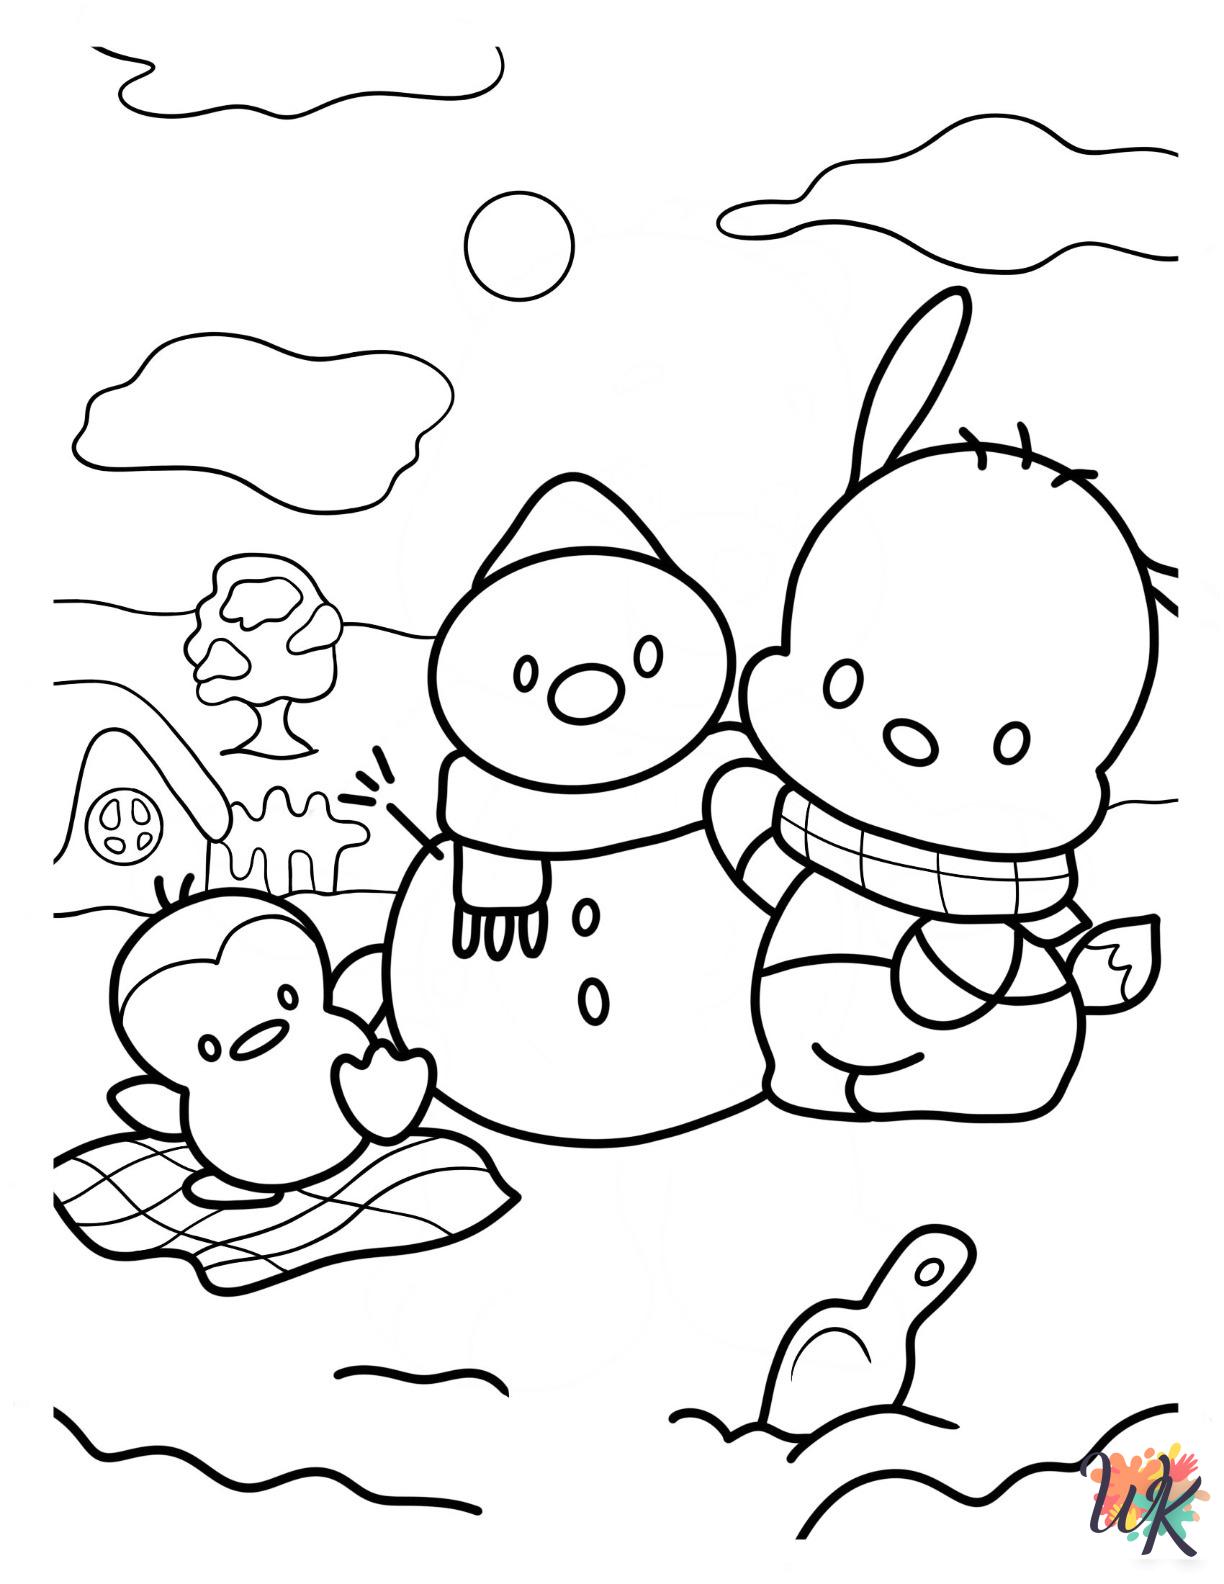 Pochacco coloring pages free printable